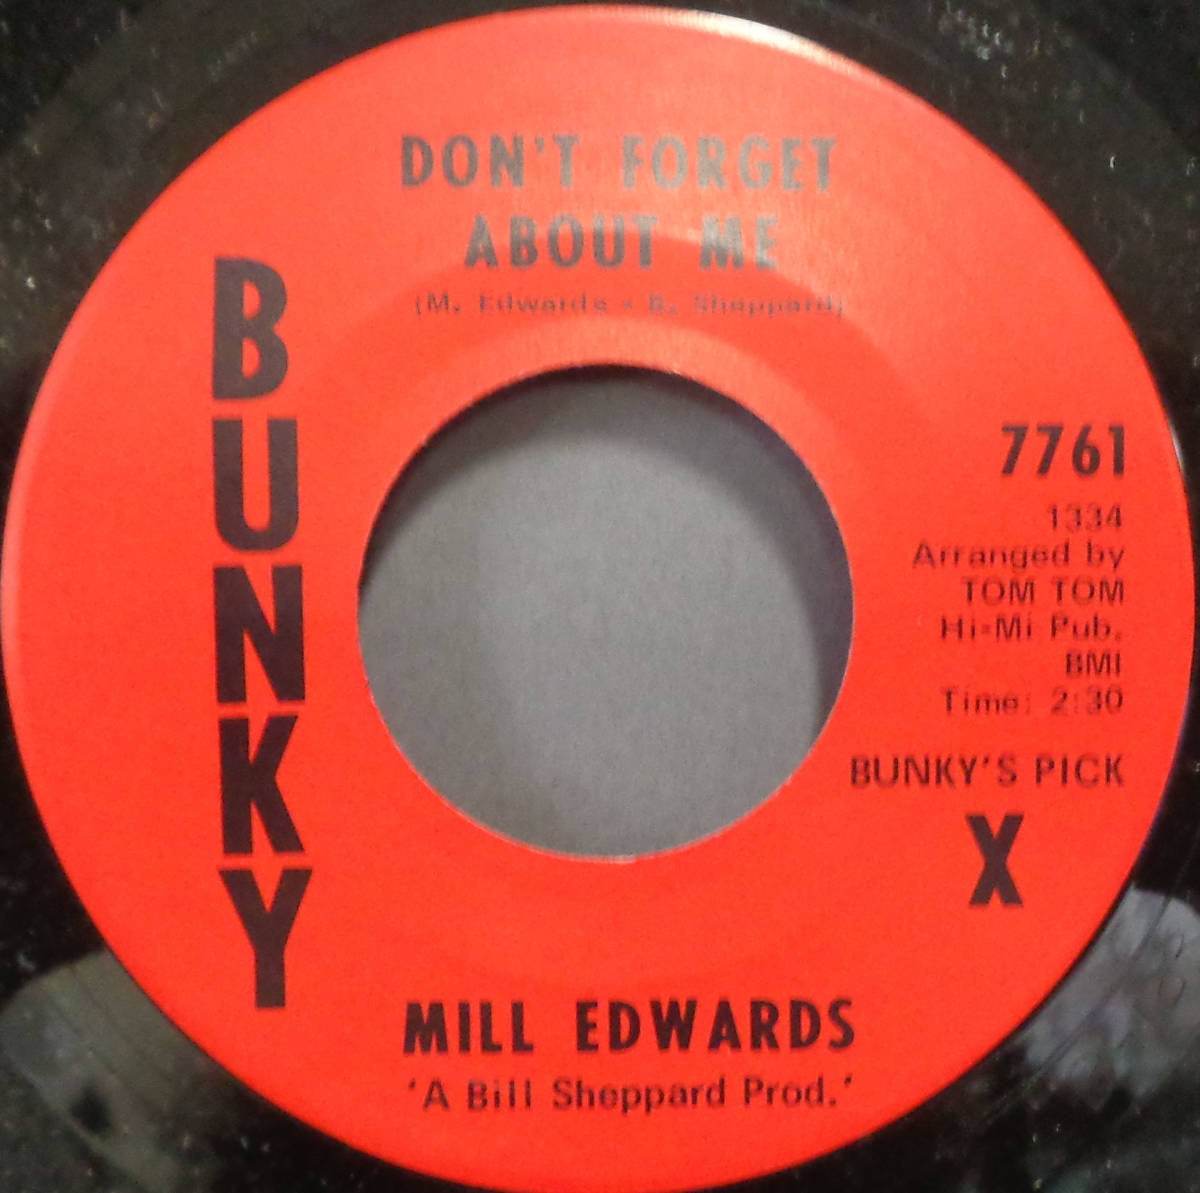 【SOUL 45】MILL EDWARDS - DON'T FORGET ABOUT ME / USE WHAT YOU GOT (s231010019)_画像1